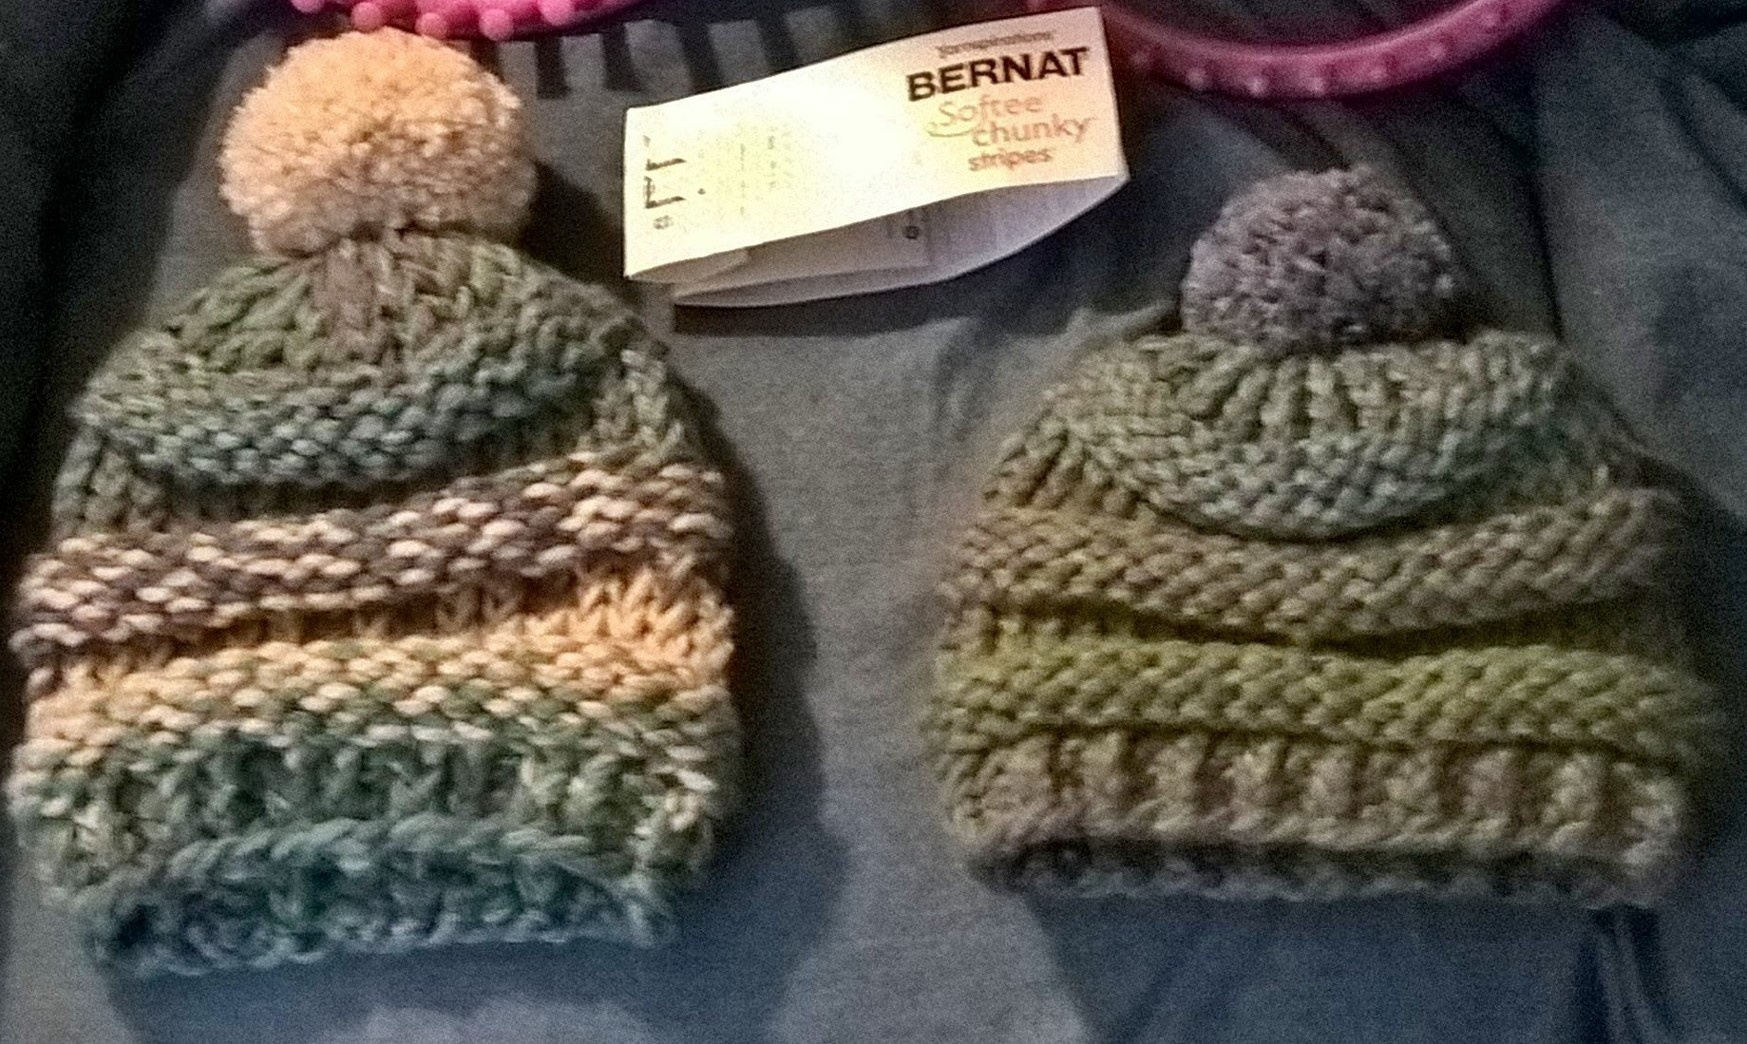 Two hats I recently made.